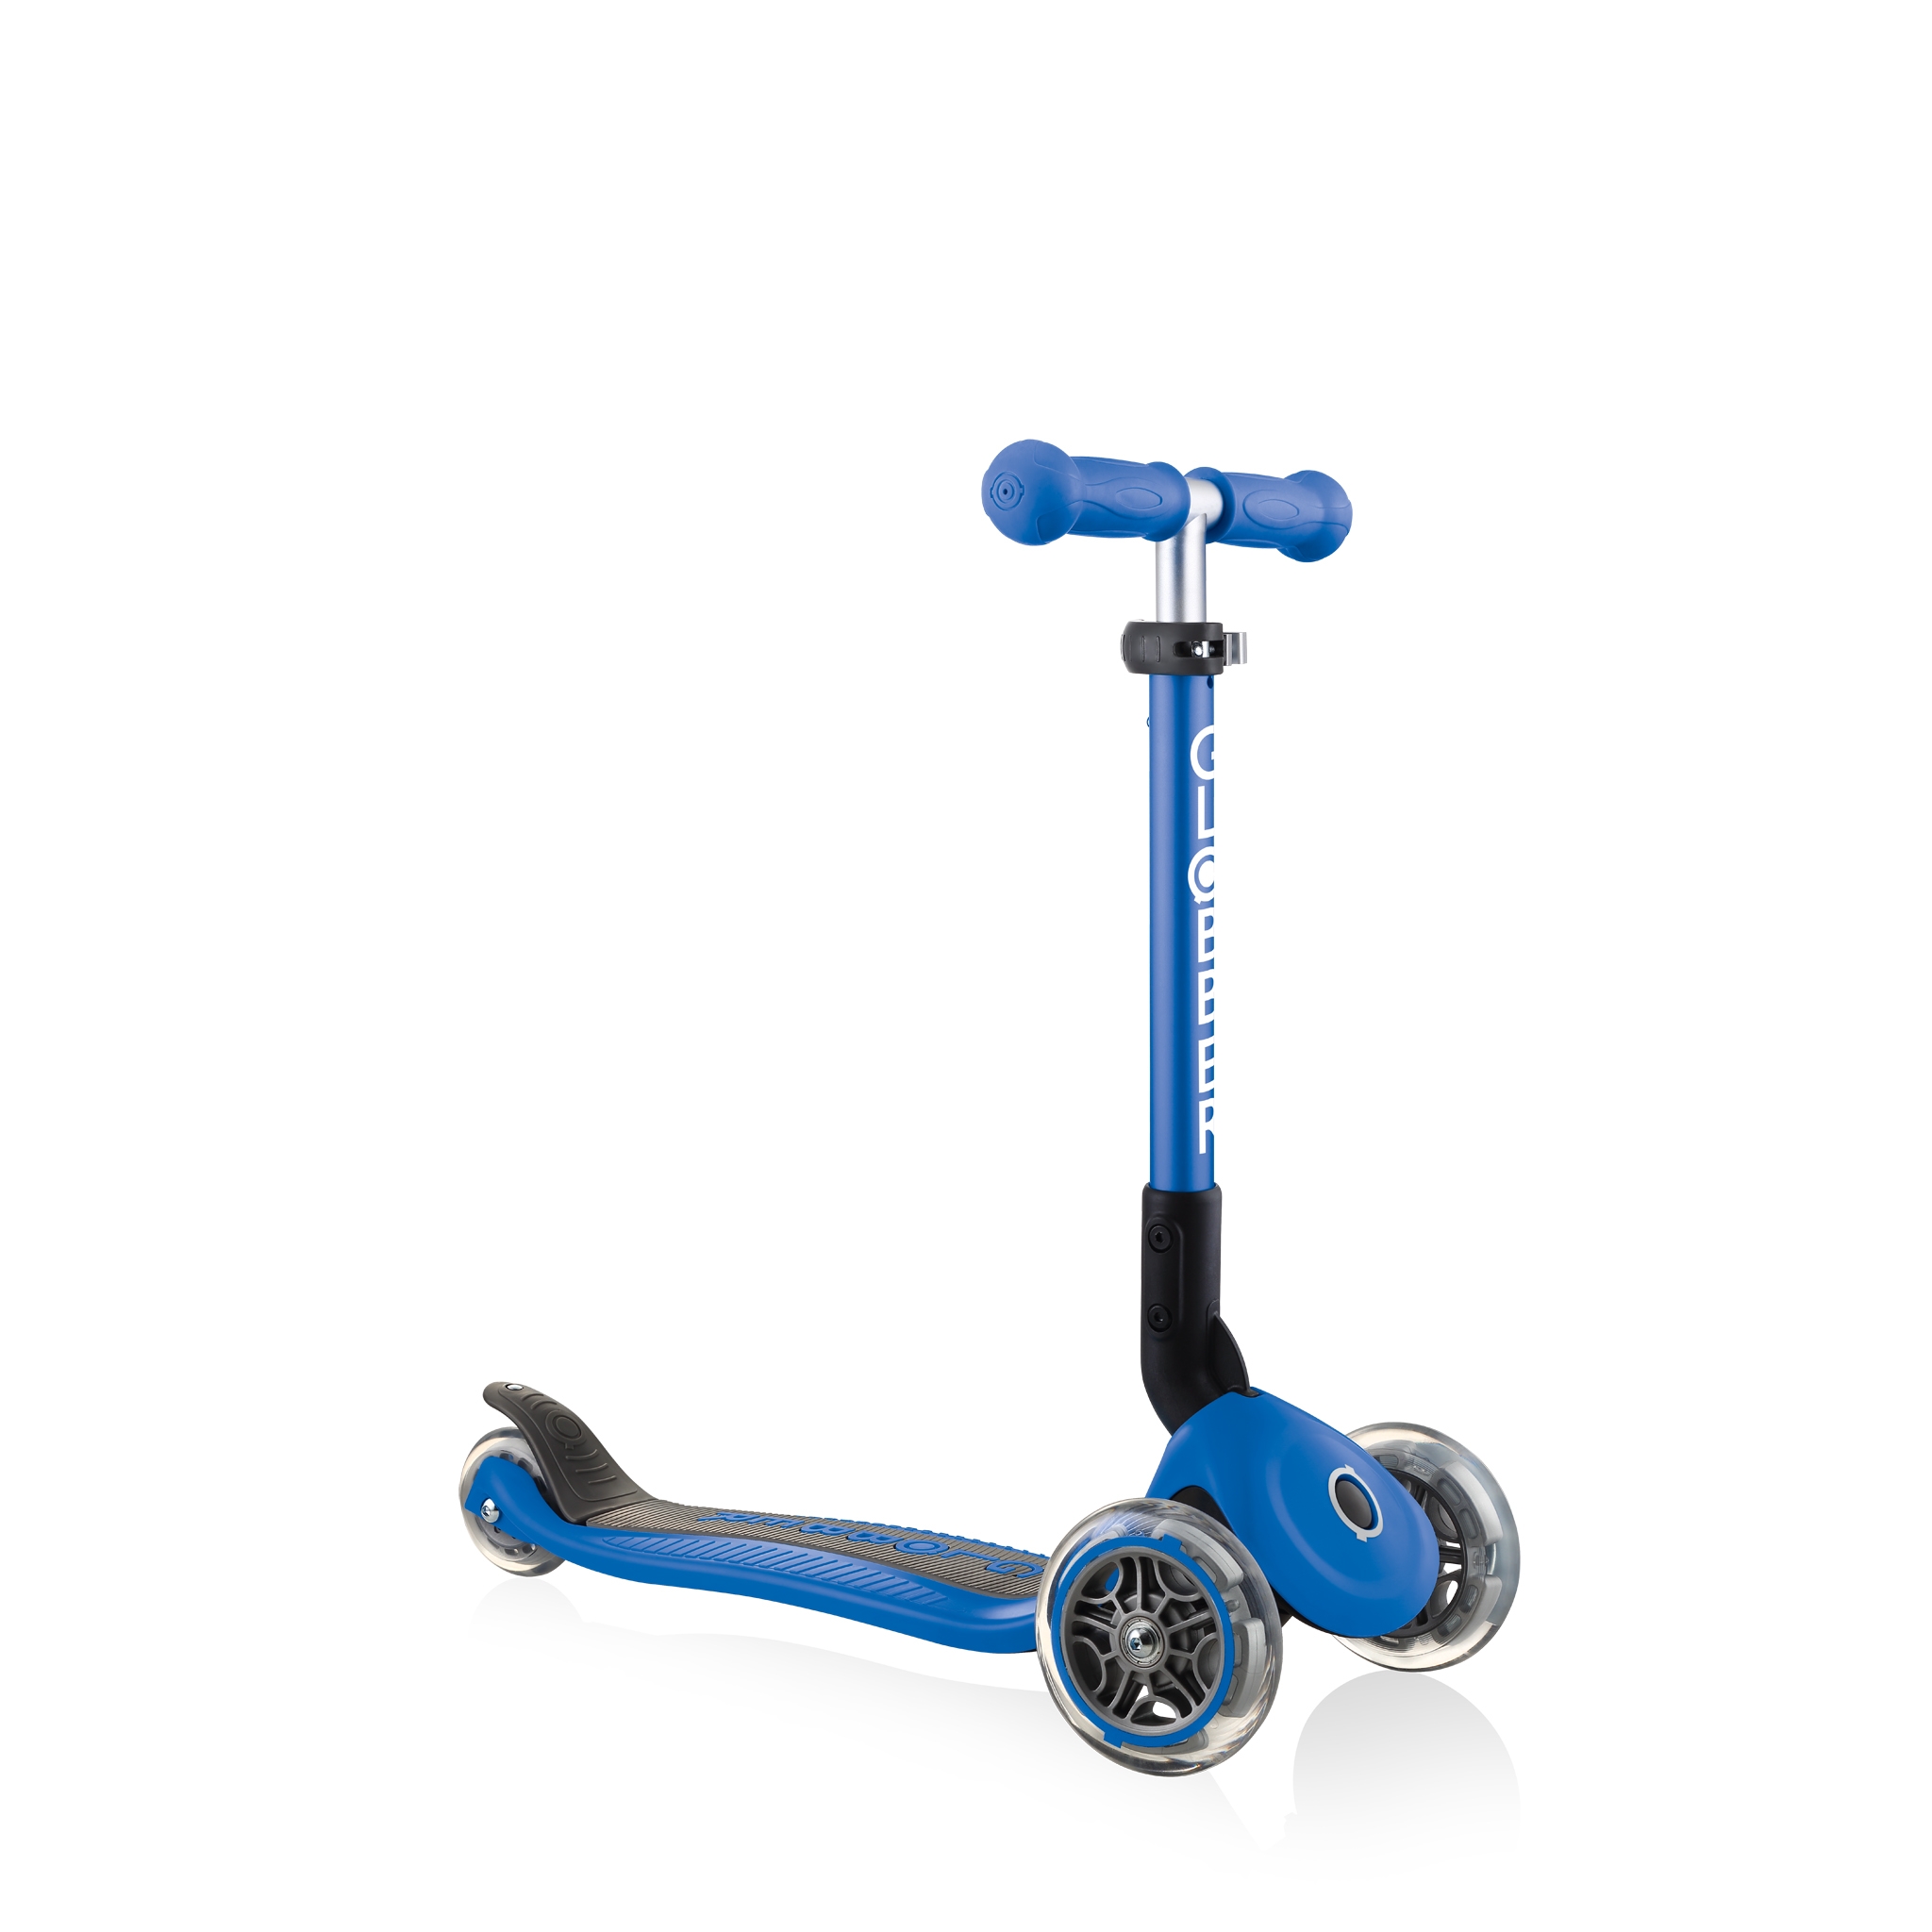 junior-foldable-3-wheel-scooter-for-toddlers 0